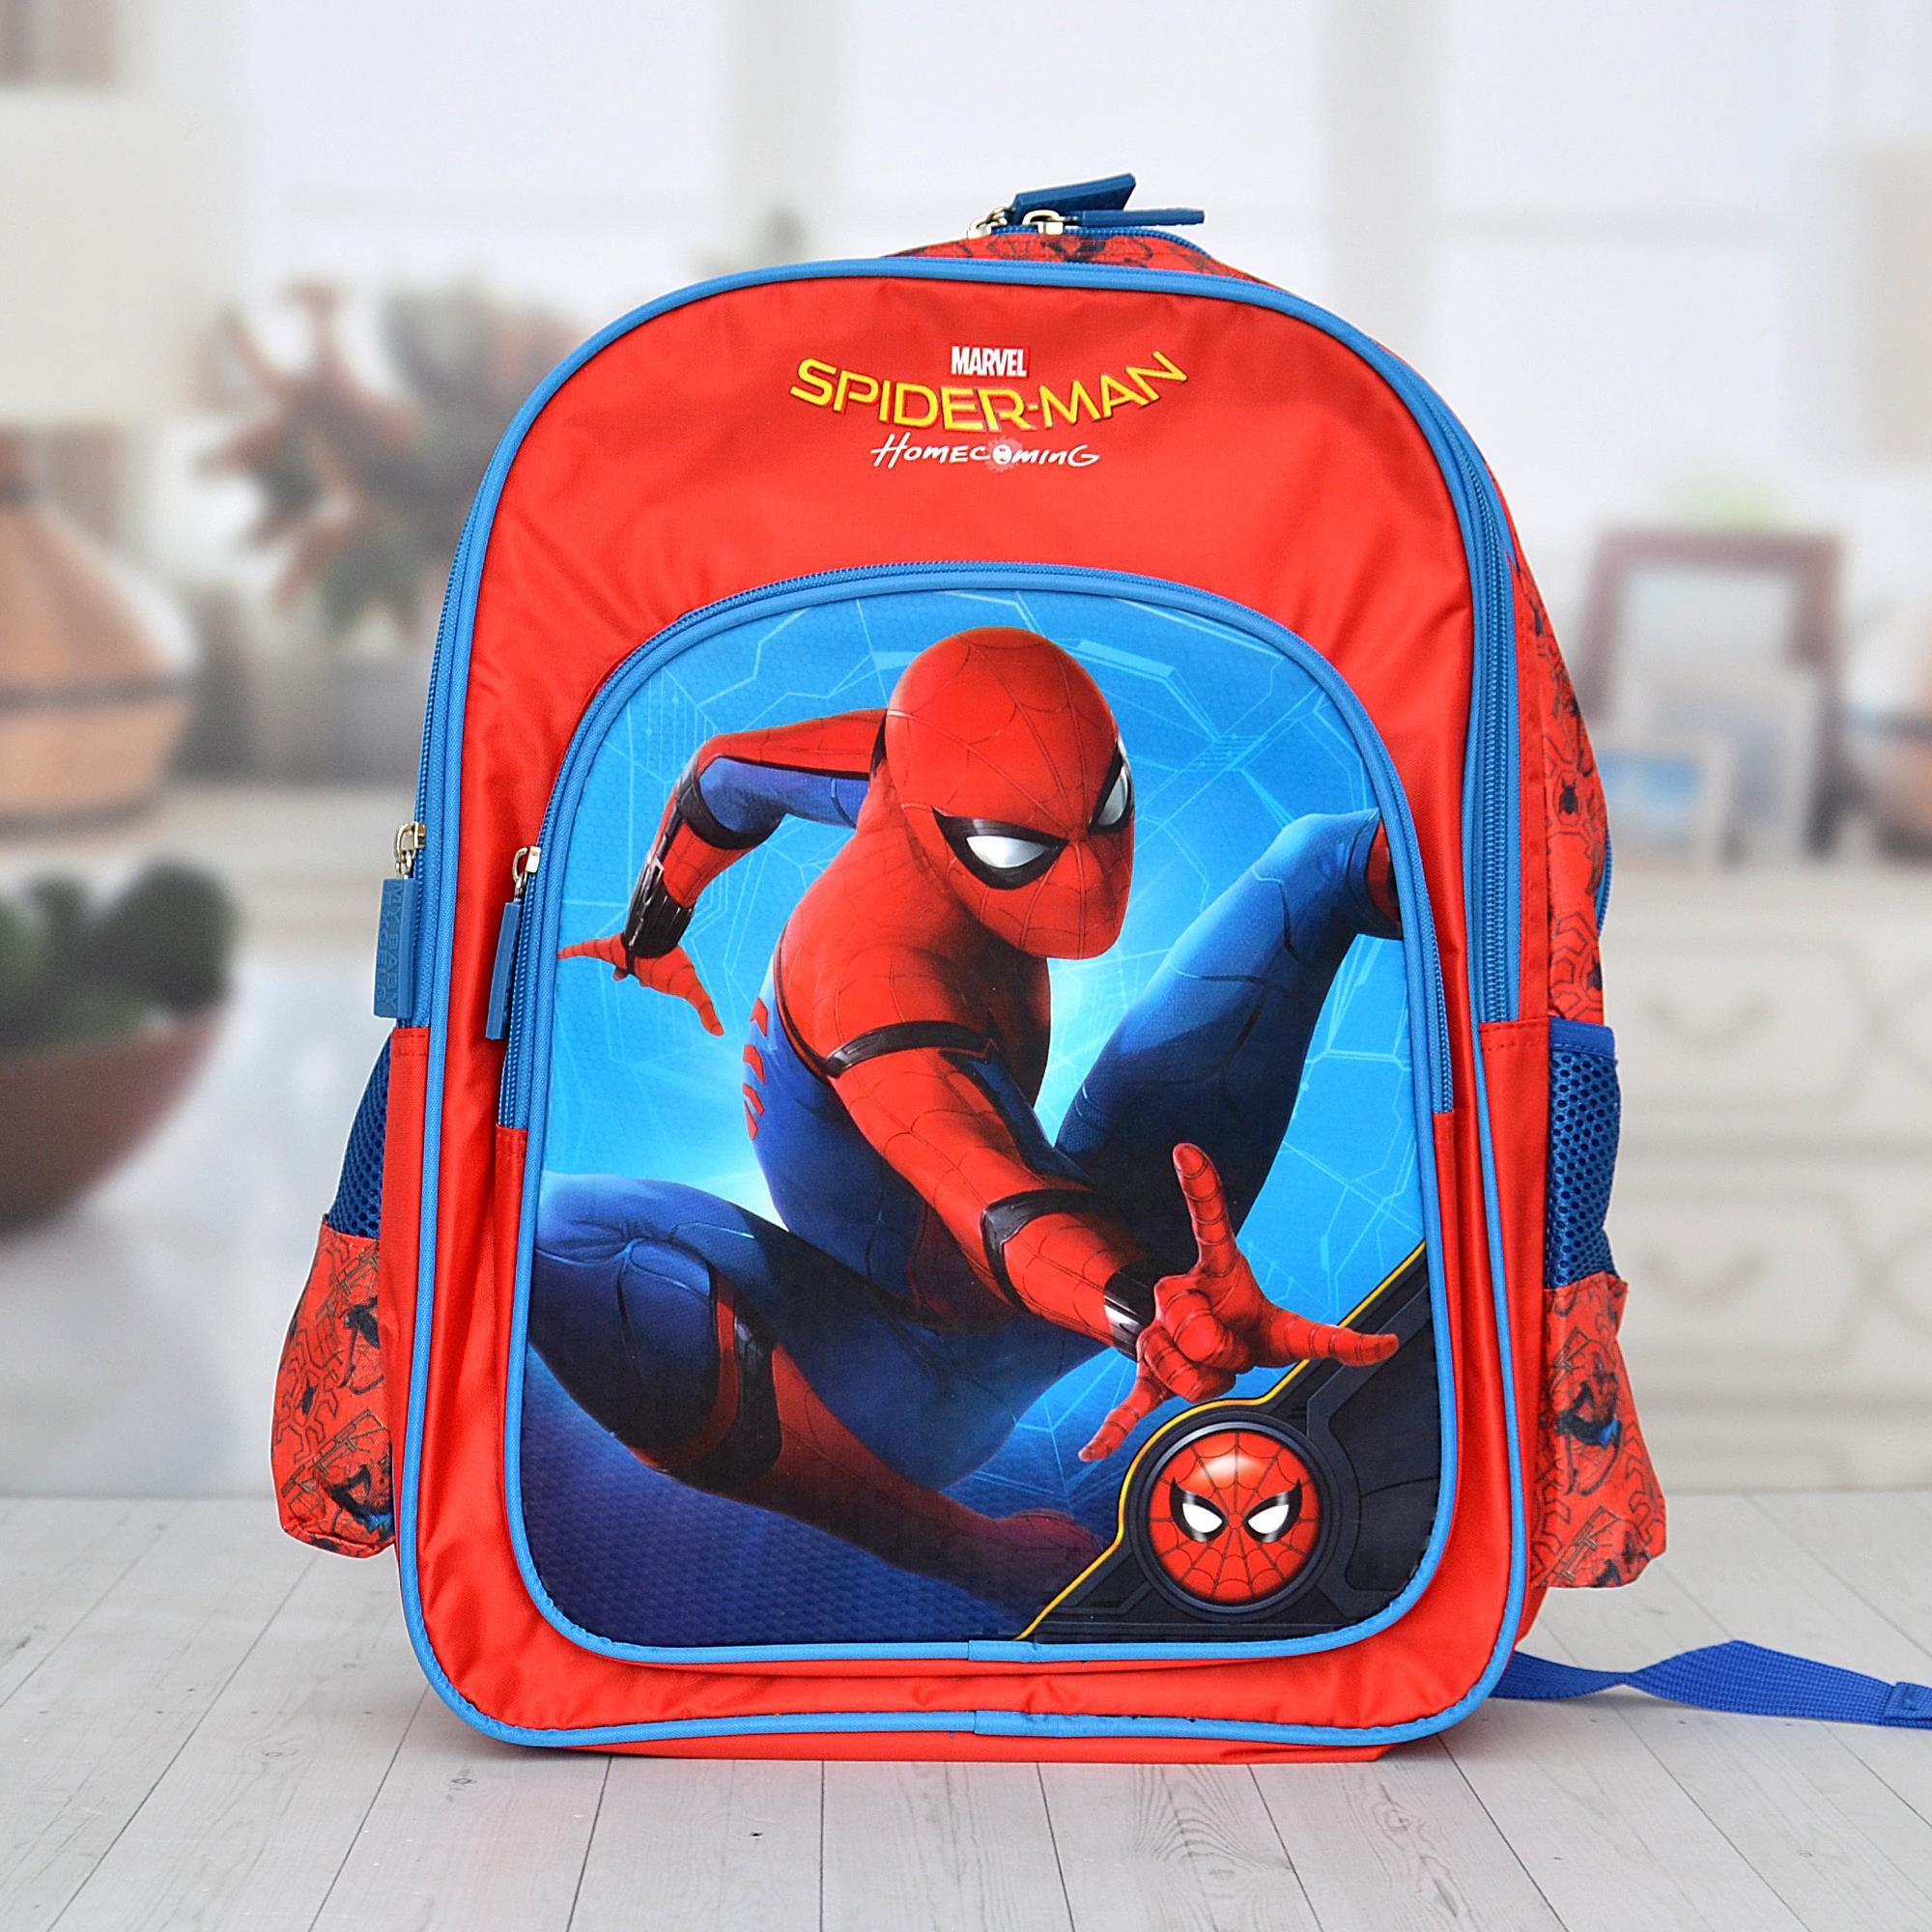 Spiderman Themed School Bag, Gifts for Kids